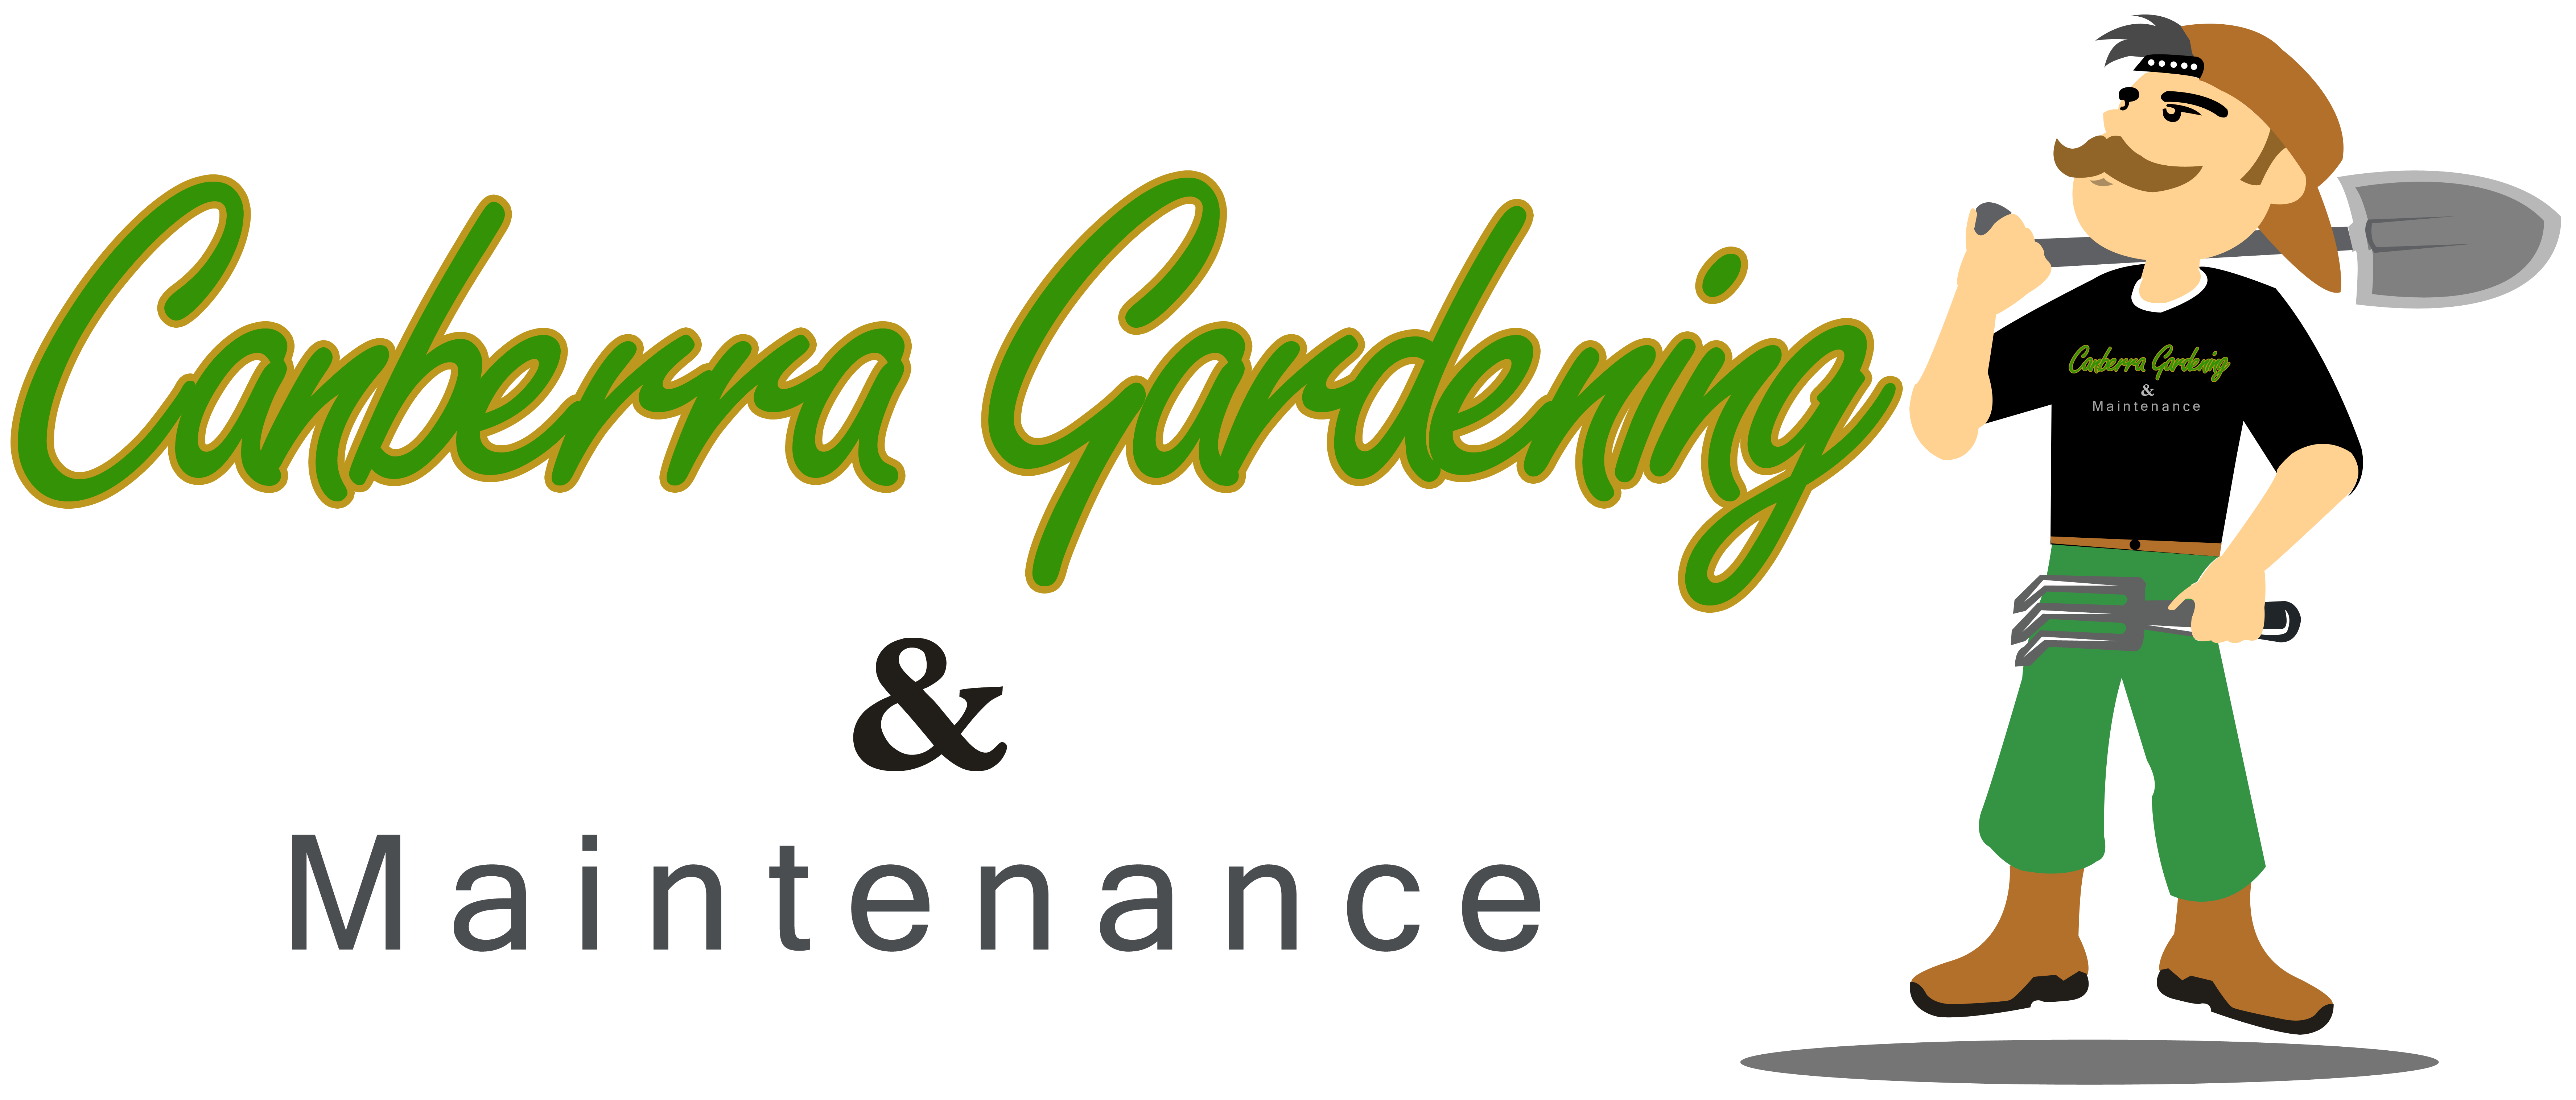 Canberra Gardening and Maintenance